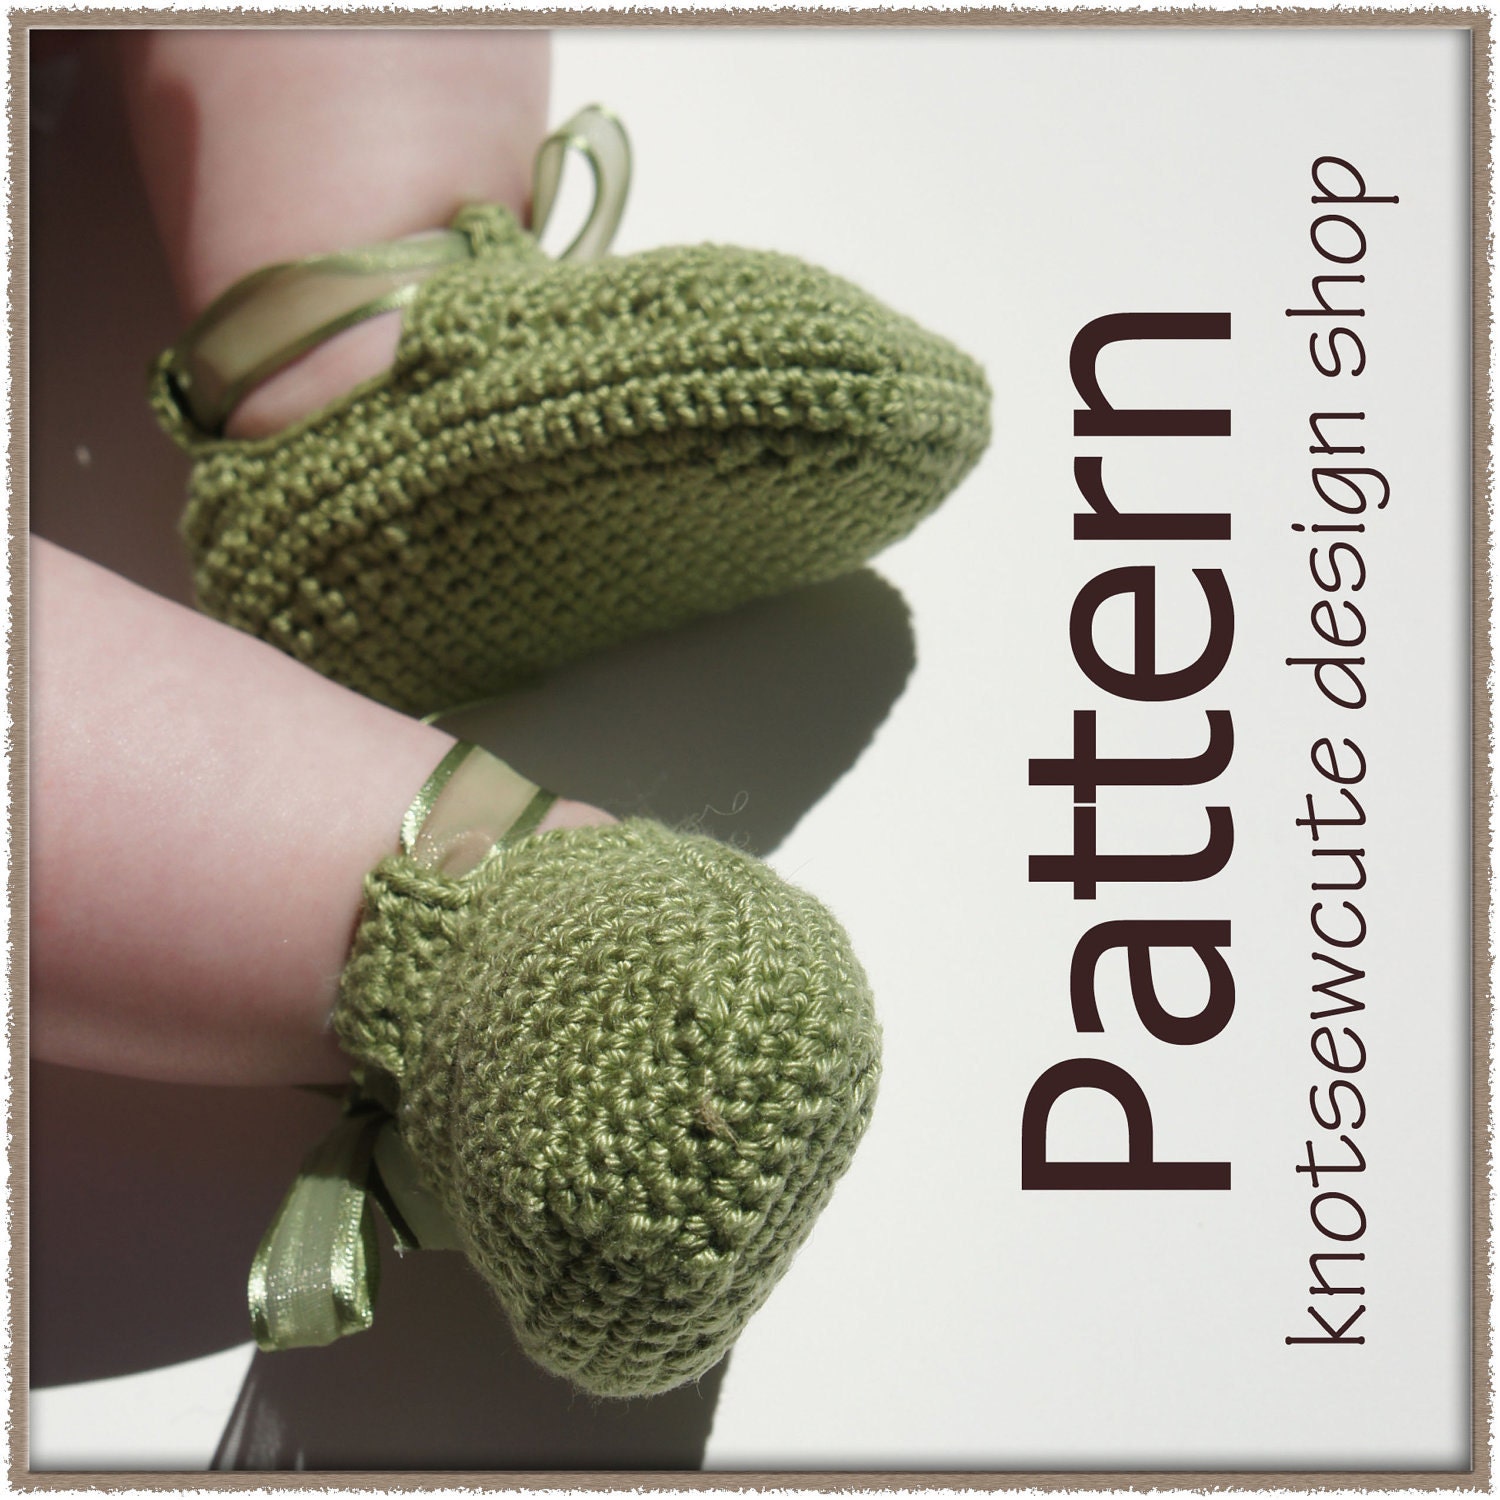 Baby Mary Jane Skimmers (crochet pattern) | Shop | Kaboodle